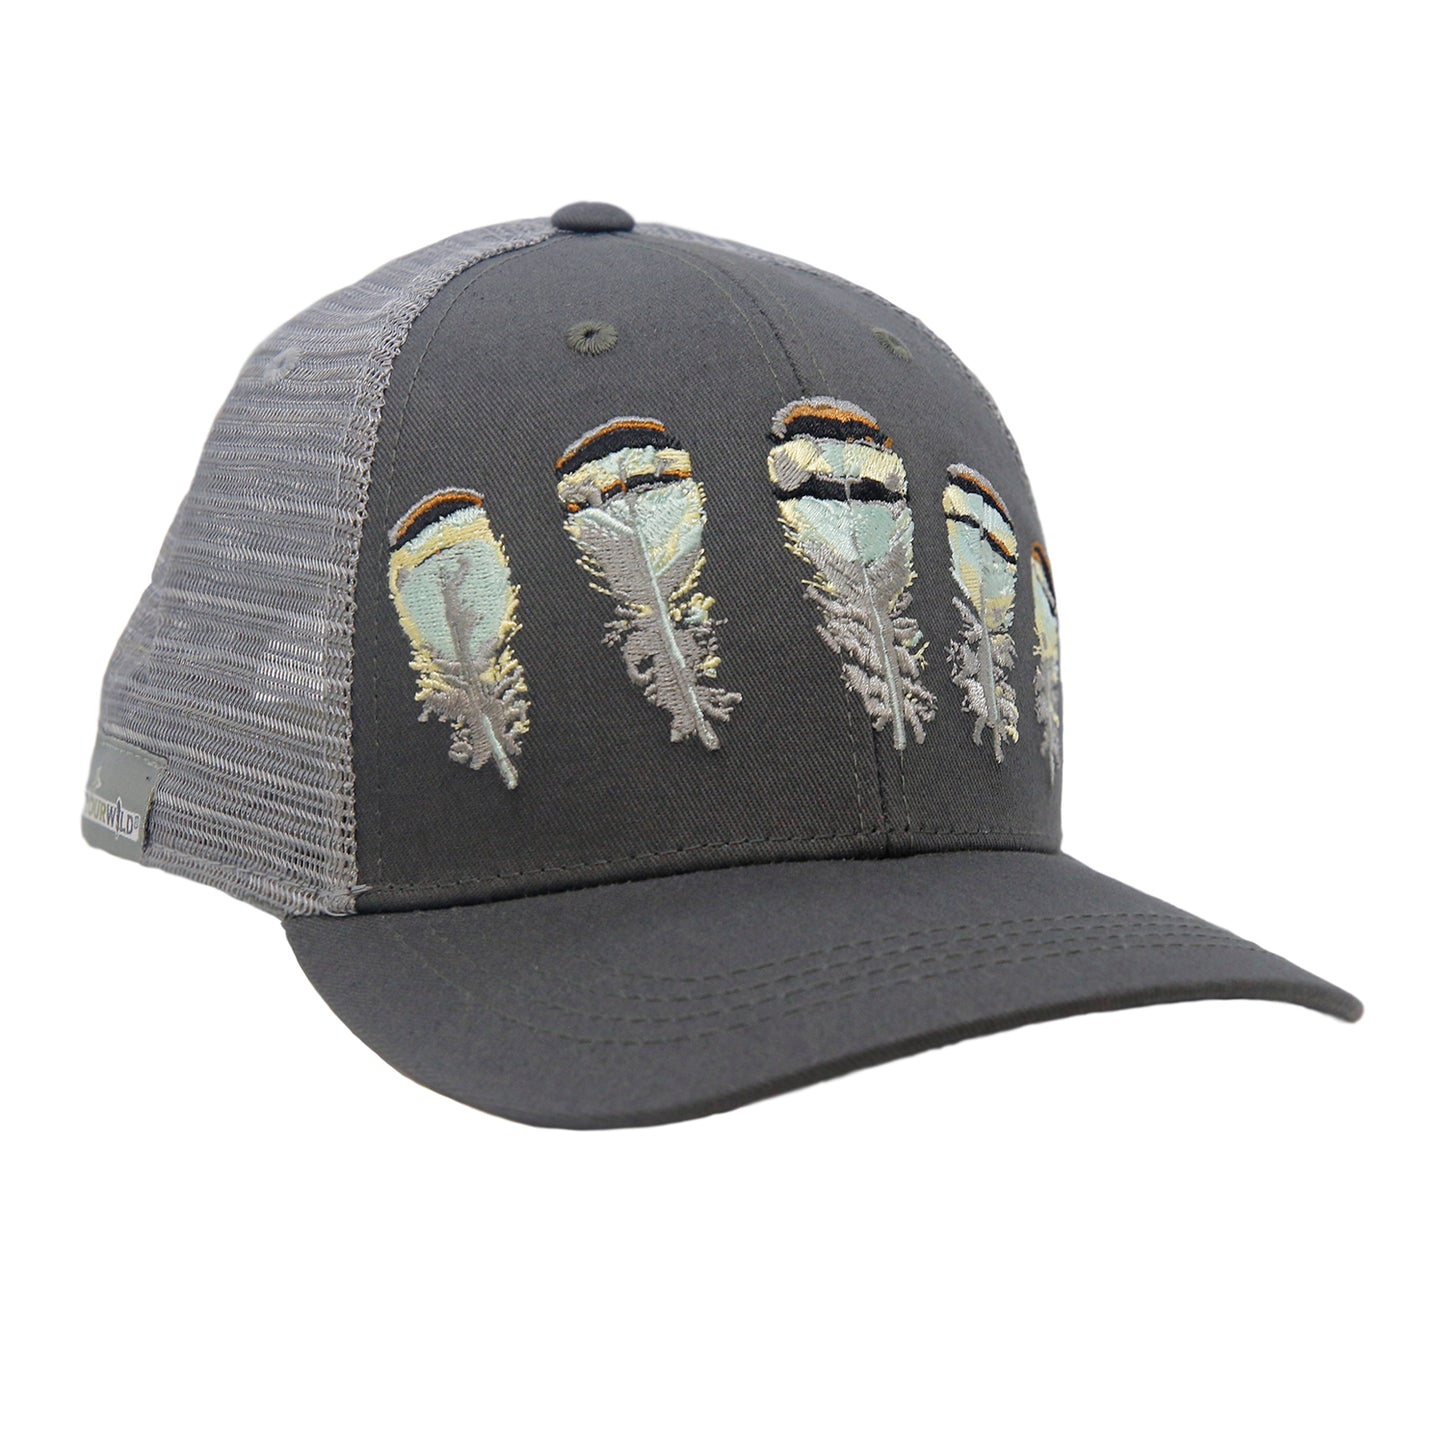 A hat with gray mesh in back and gray fabric in front has 5 feathers embroidered on the front